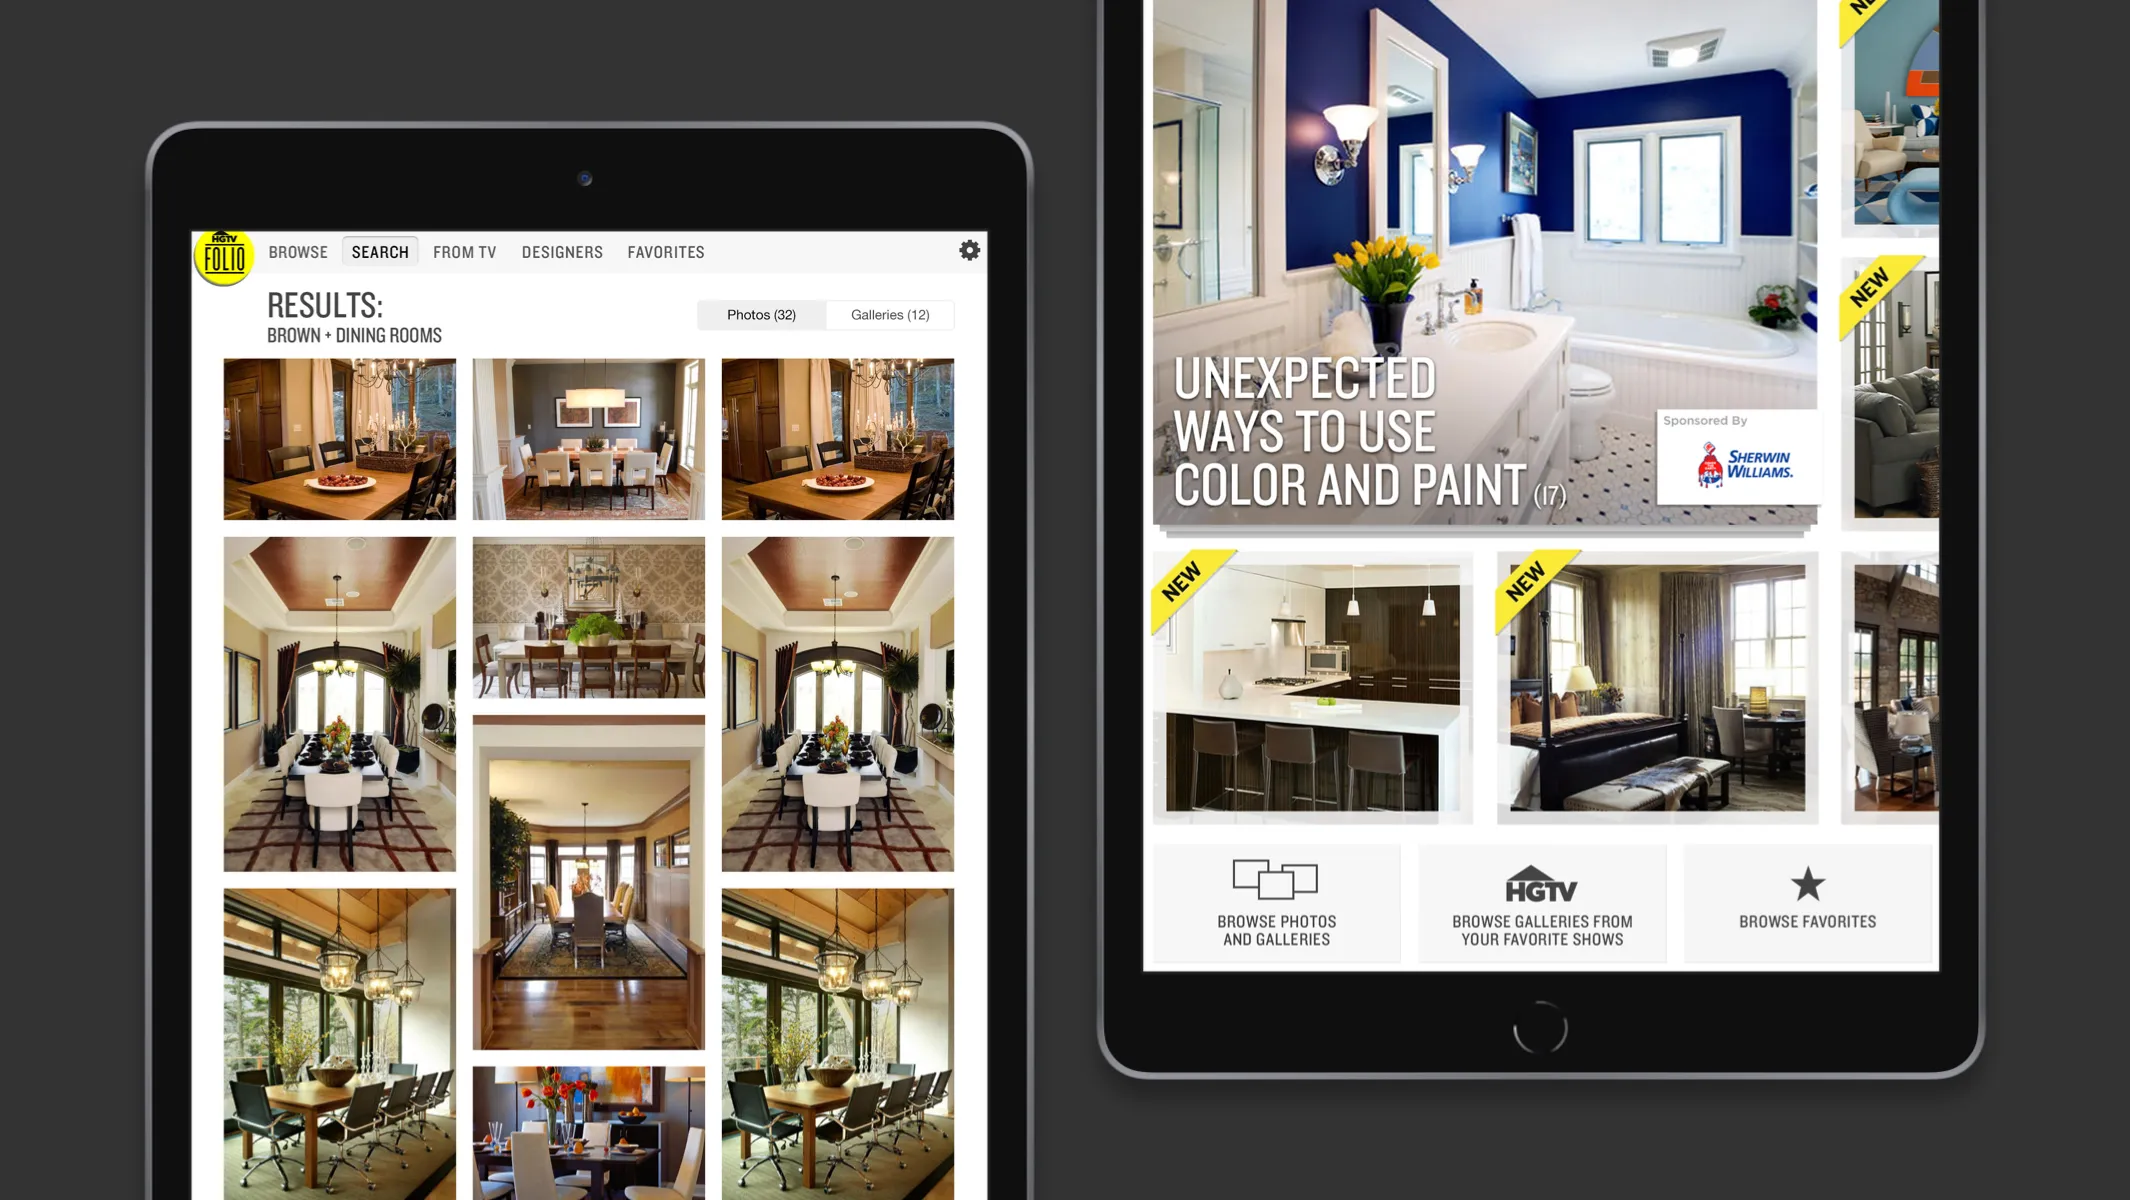 Tablet showing search results and homepage of HGTV Folio app